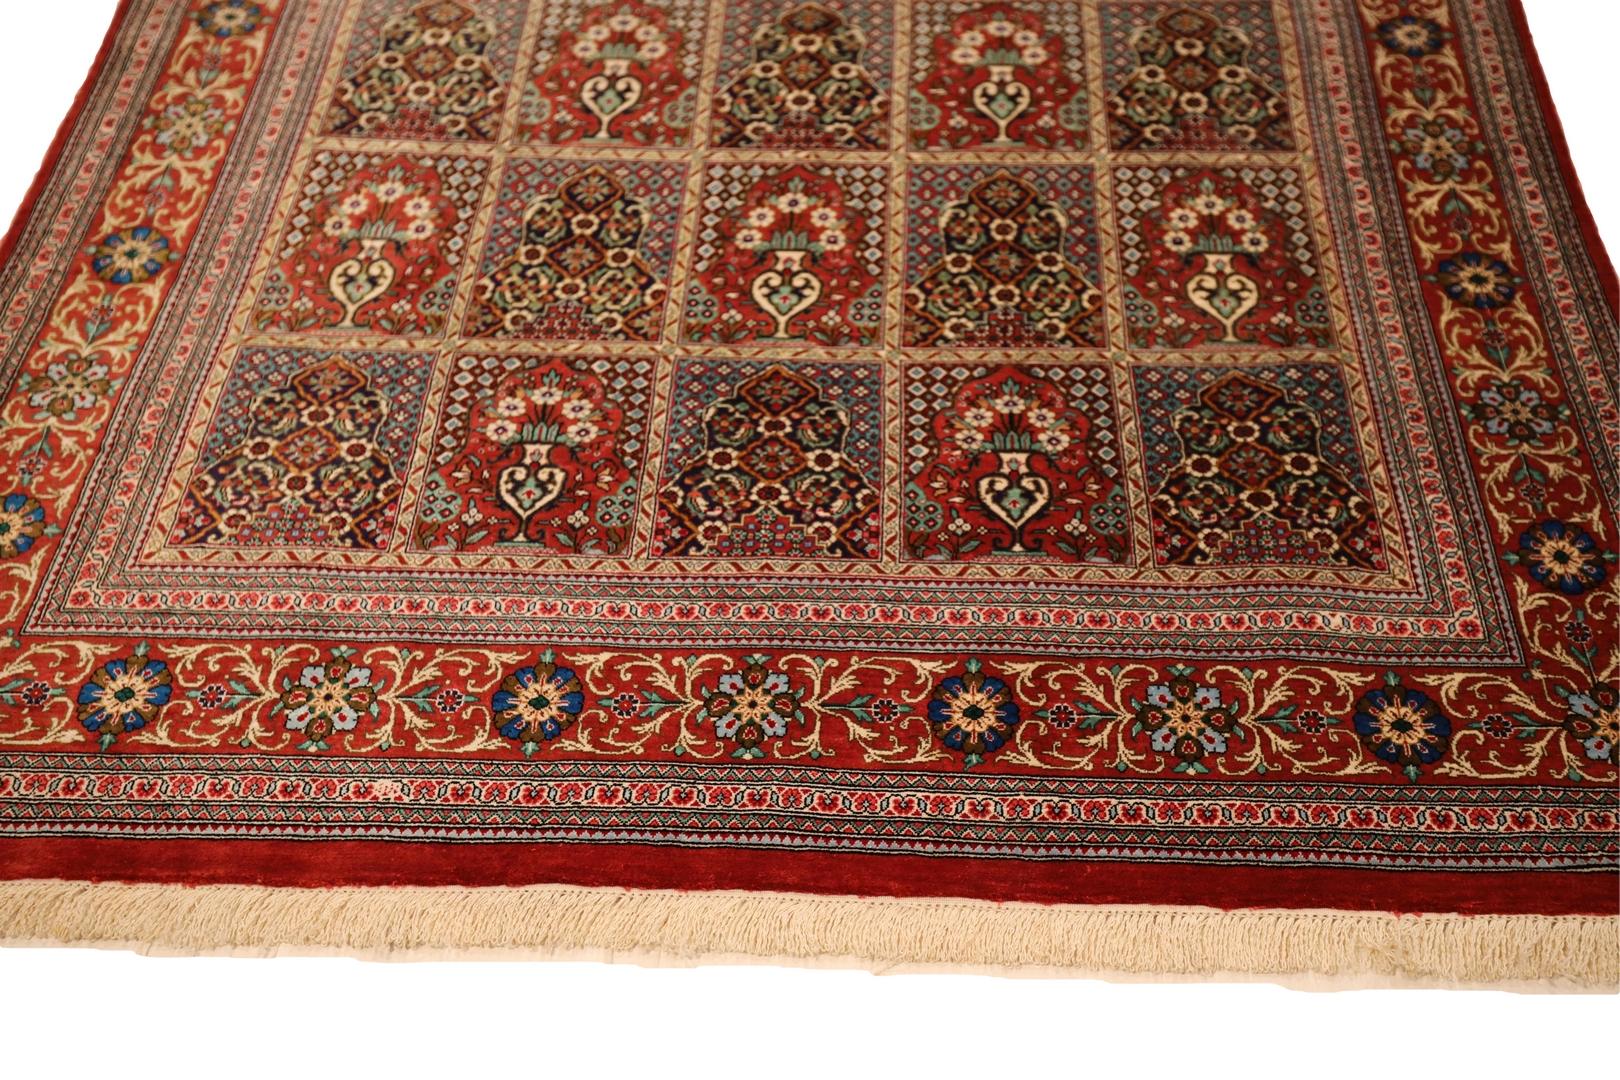 Hand-Knotted Signed Qum Silk Rug - 3'4